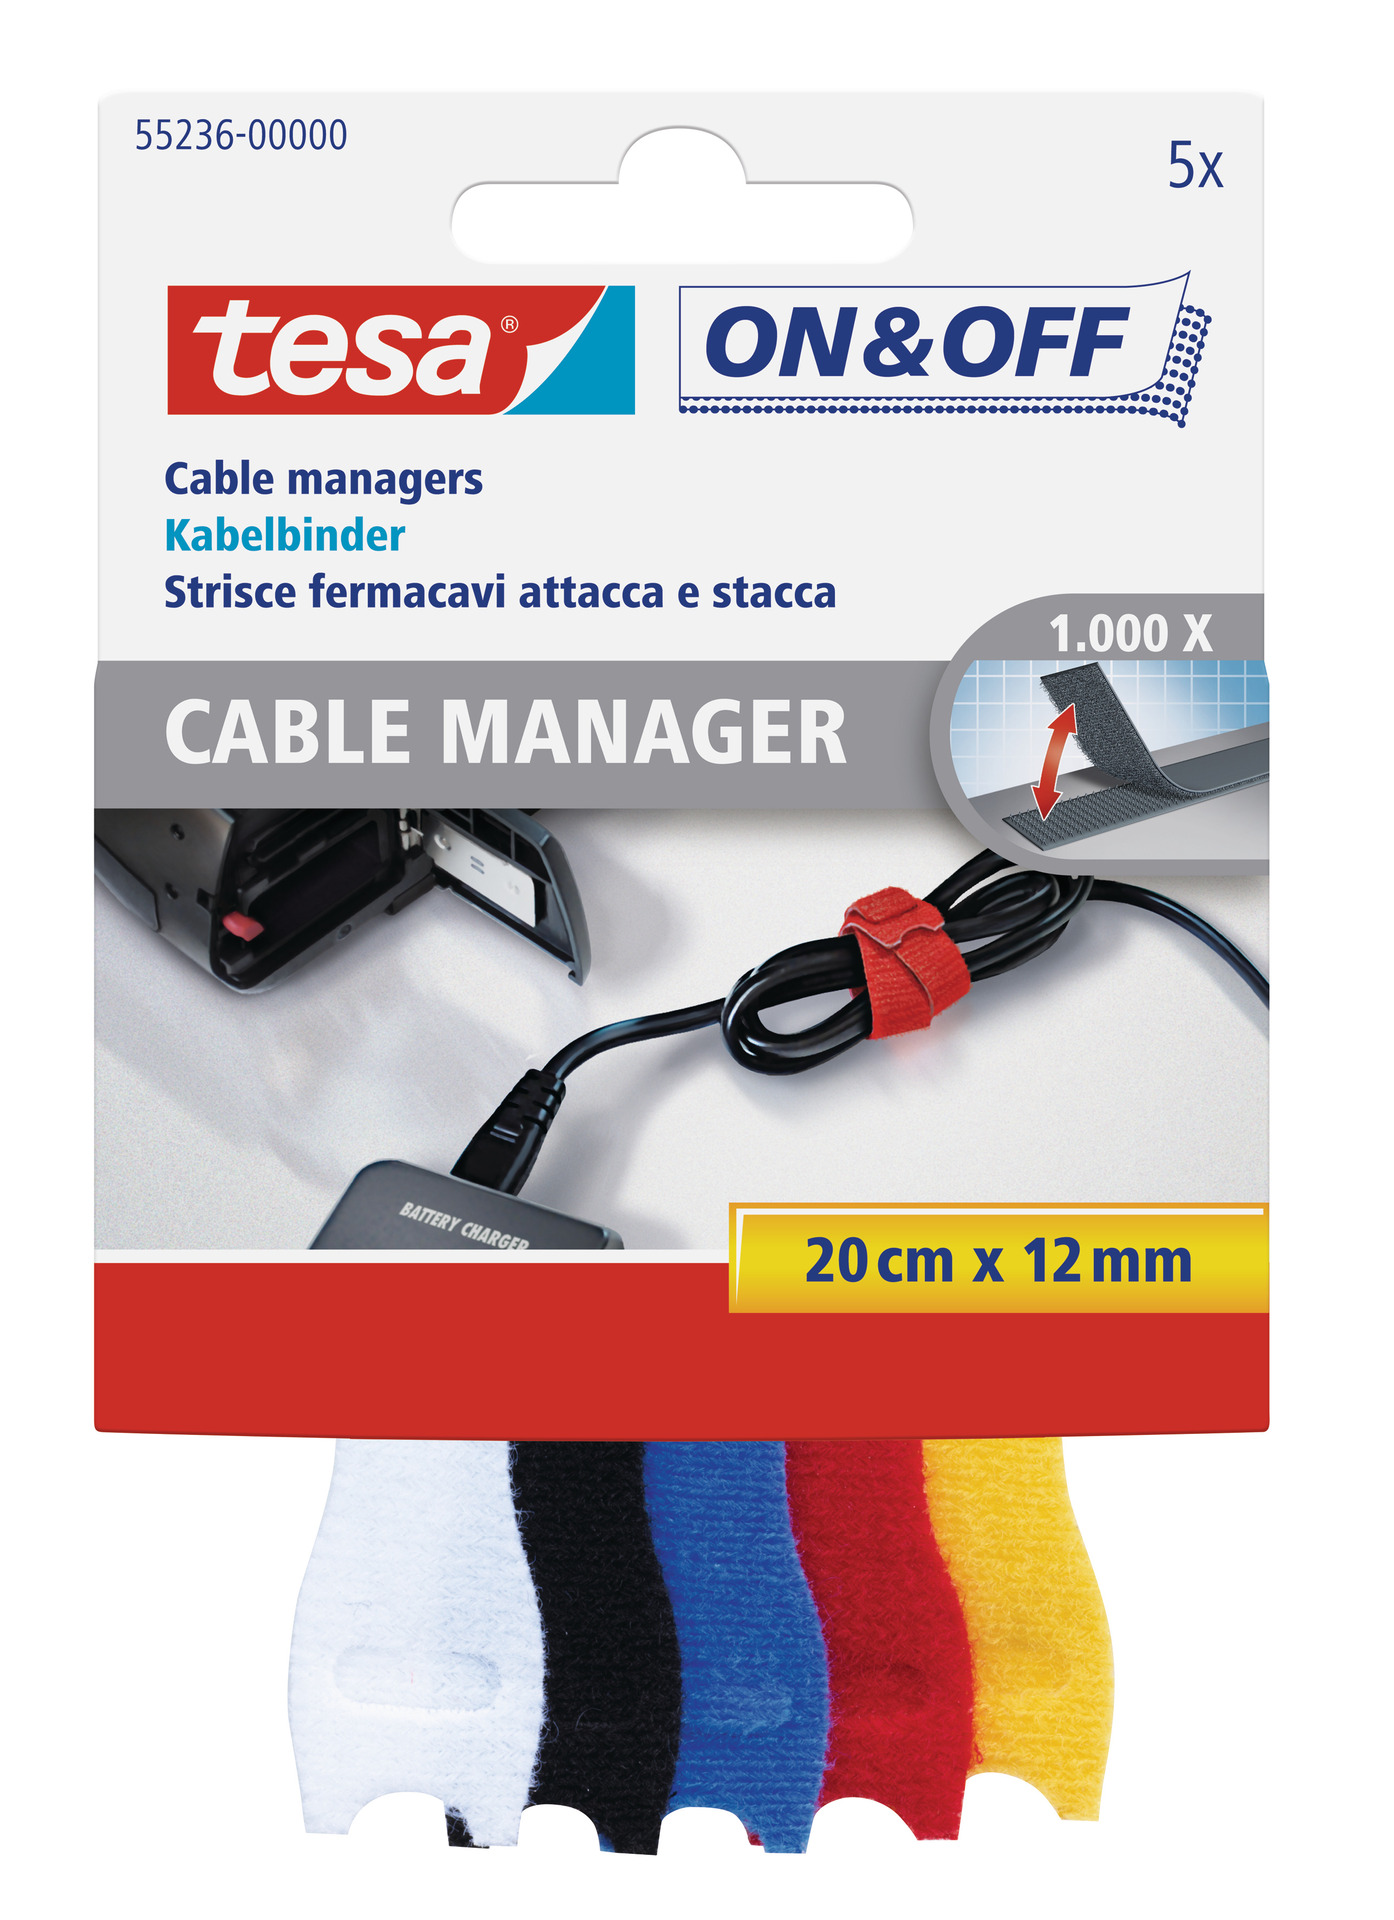 Tesa On and Off 5 x Cable Manager bunt